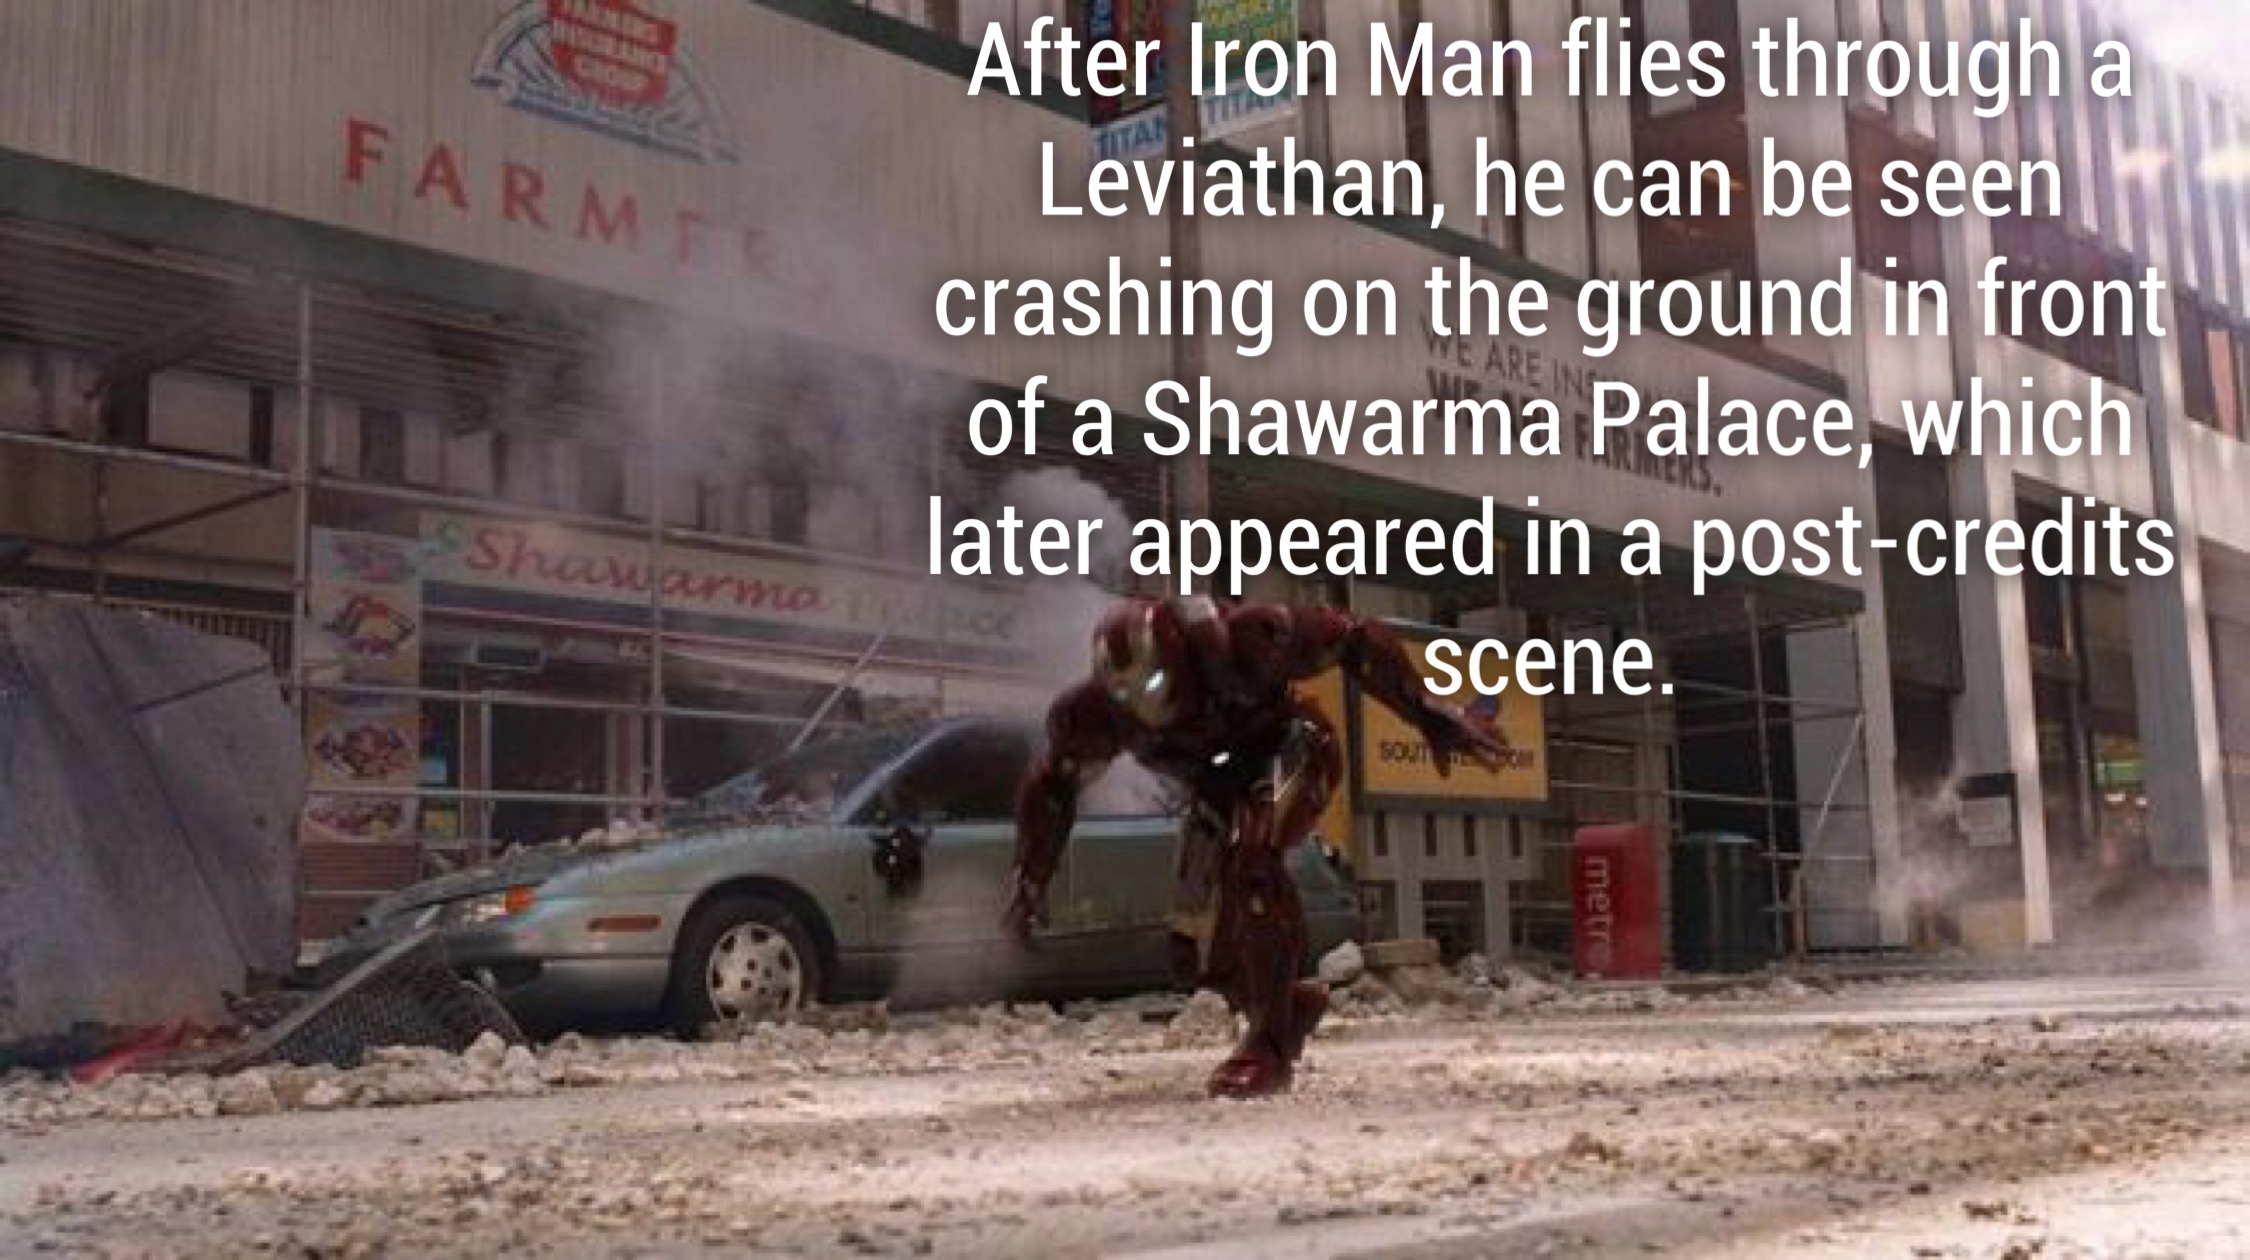 avengers 2 shawarma - Farm After Iron Man flies through a Leviathan, he can be seen crashing on the ground in front of a Shawarma Palace, which later appeared in a postcredits scene. Slo